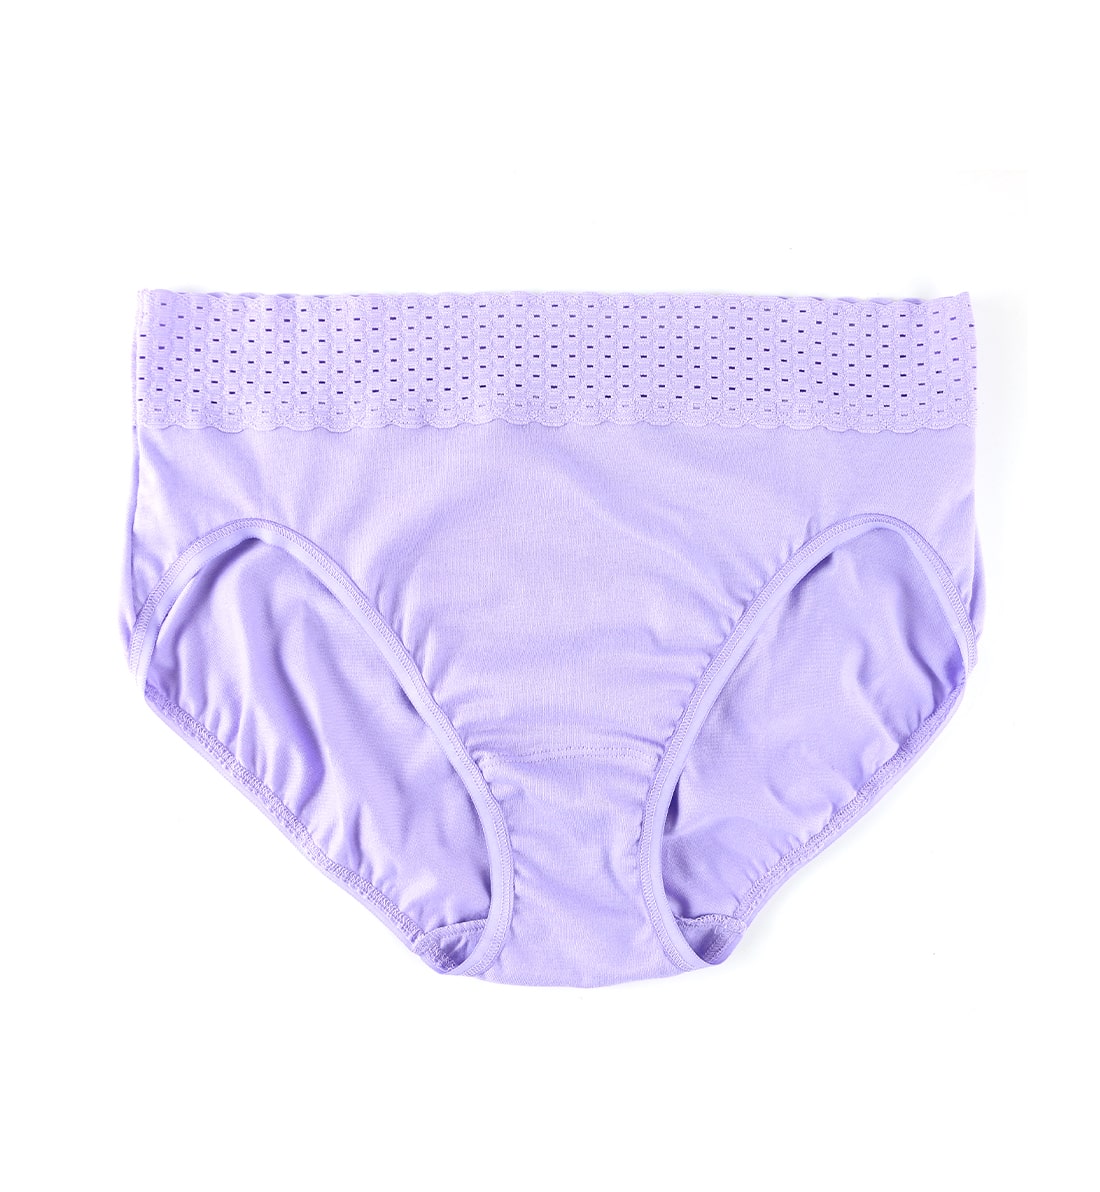 Hanky Panky Organic Cotton French Brief with Lace (792131),Small,Wisteria - Wisteria,Small